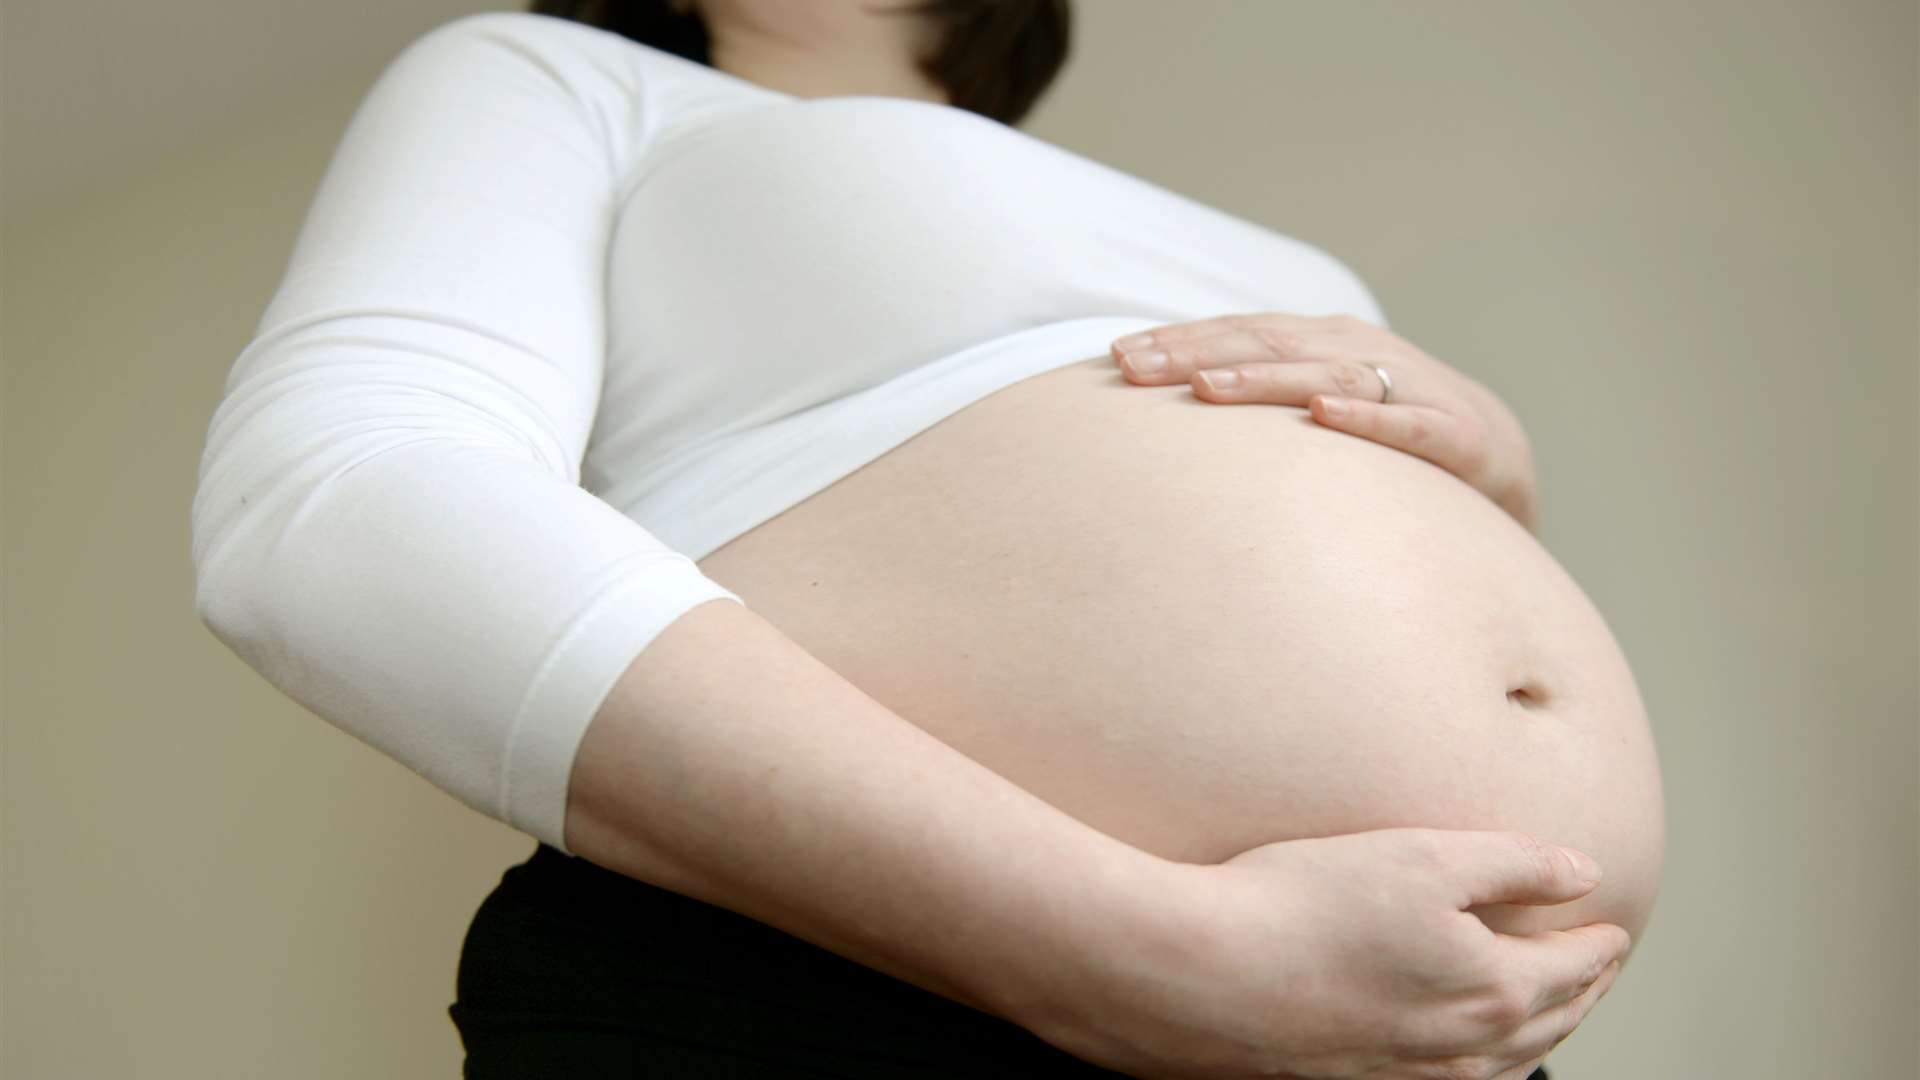 The Baby Center has an online calculator to help you determine whether or not you're a healthy weight while pregnant